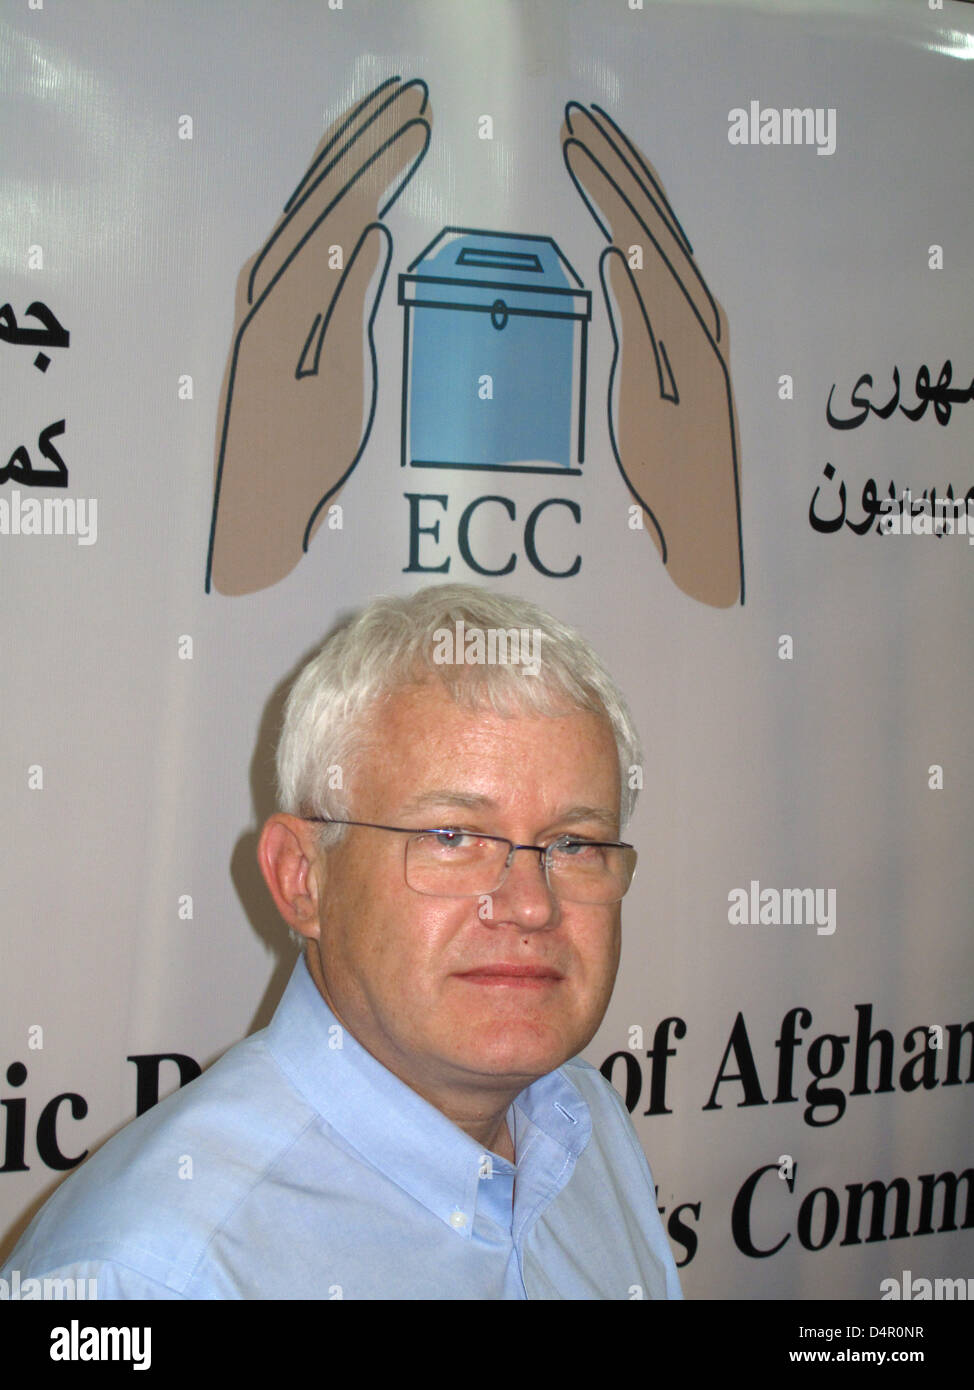 The chairman of the UN-backed Electoral Complaints Commission (ECC) for the Afghan Presidential elections, Canadian Grant Kippen, at a press conference in Kabul, Afghanistan, 14 September 2009. Speaking at the press conference he told journalists that the final results of the Afghan Presidential elections could not be announced on 17 September, as originally scheduled. Kippen said  Stock Photo